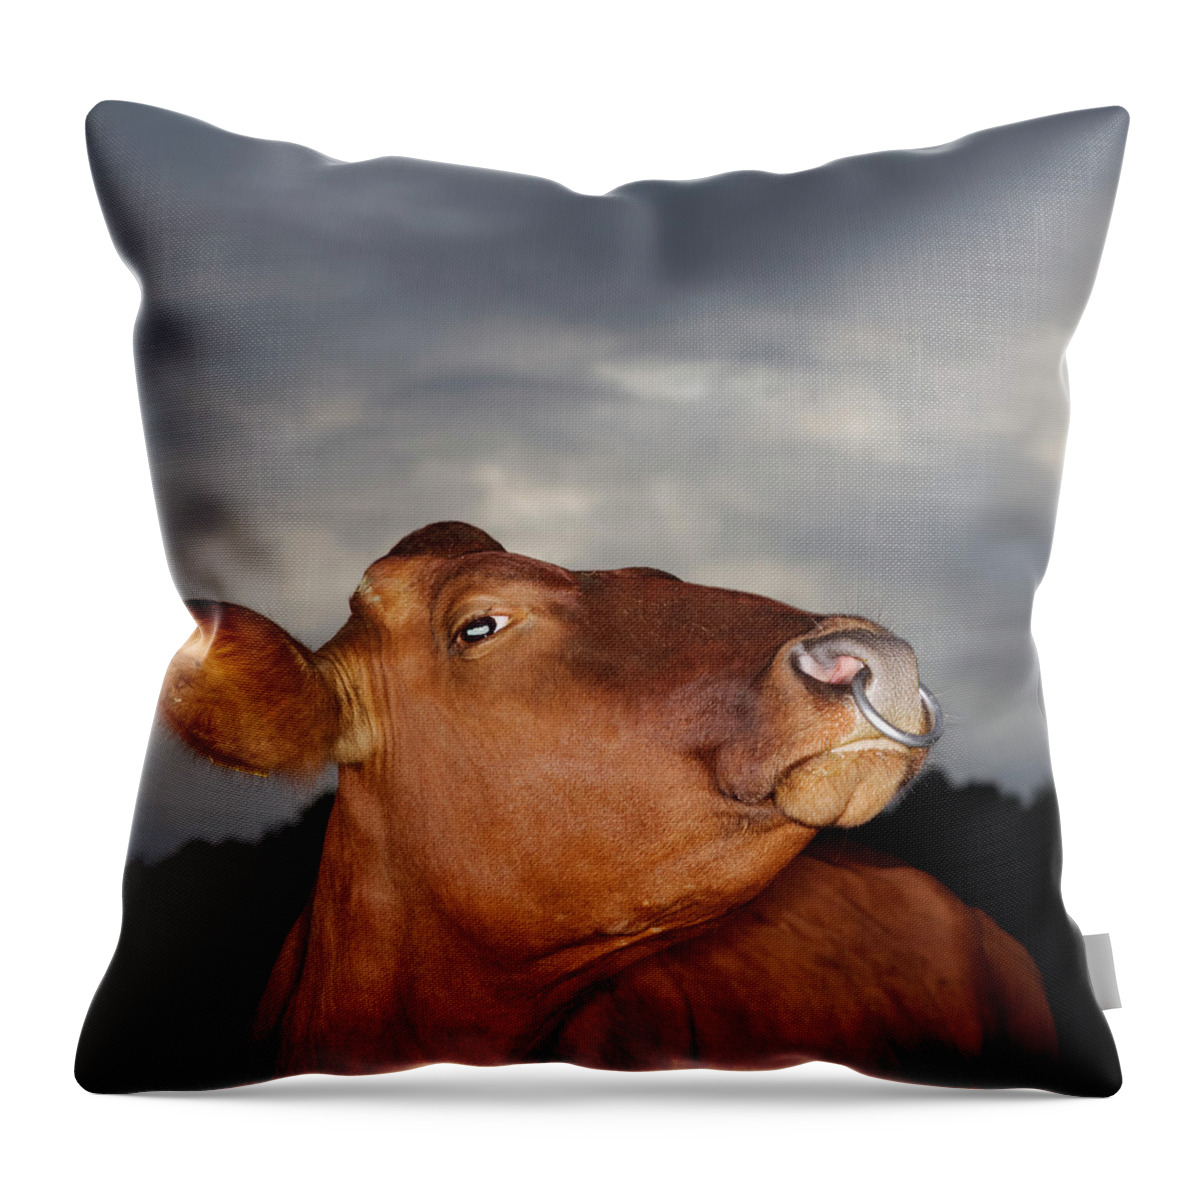 Sweden Throw Pillow featuring the photograph Bull In Evening Light by Roine Magnusson